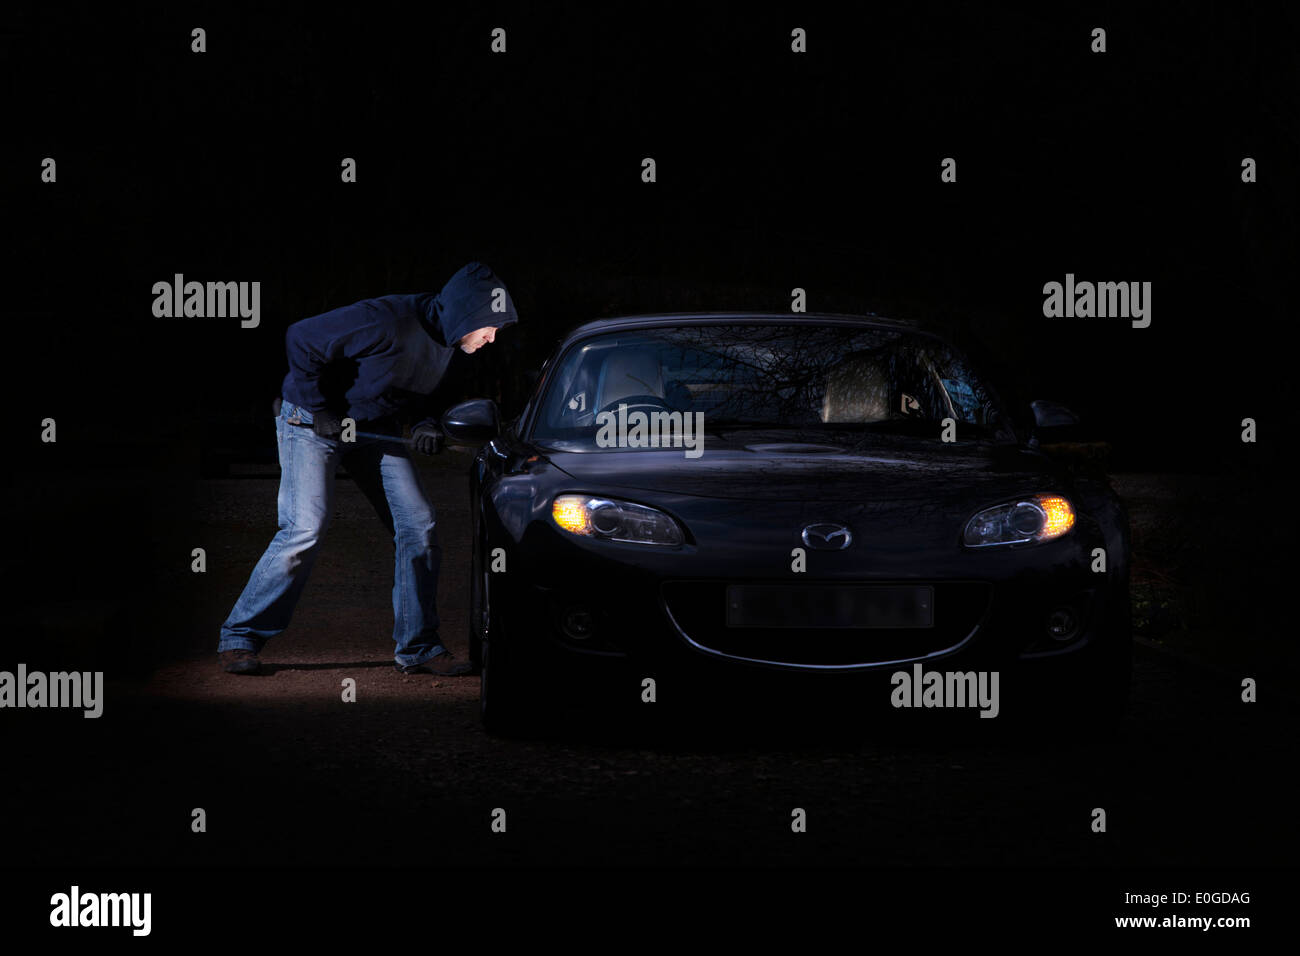 Thief breaking into parked a car at night. Stock Photo